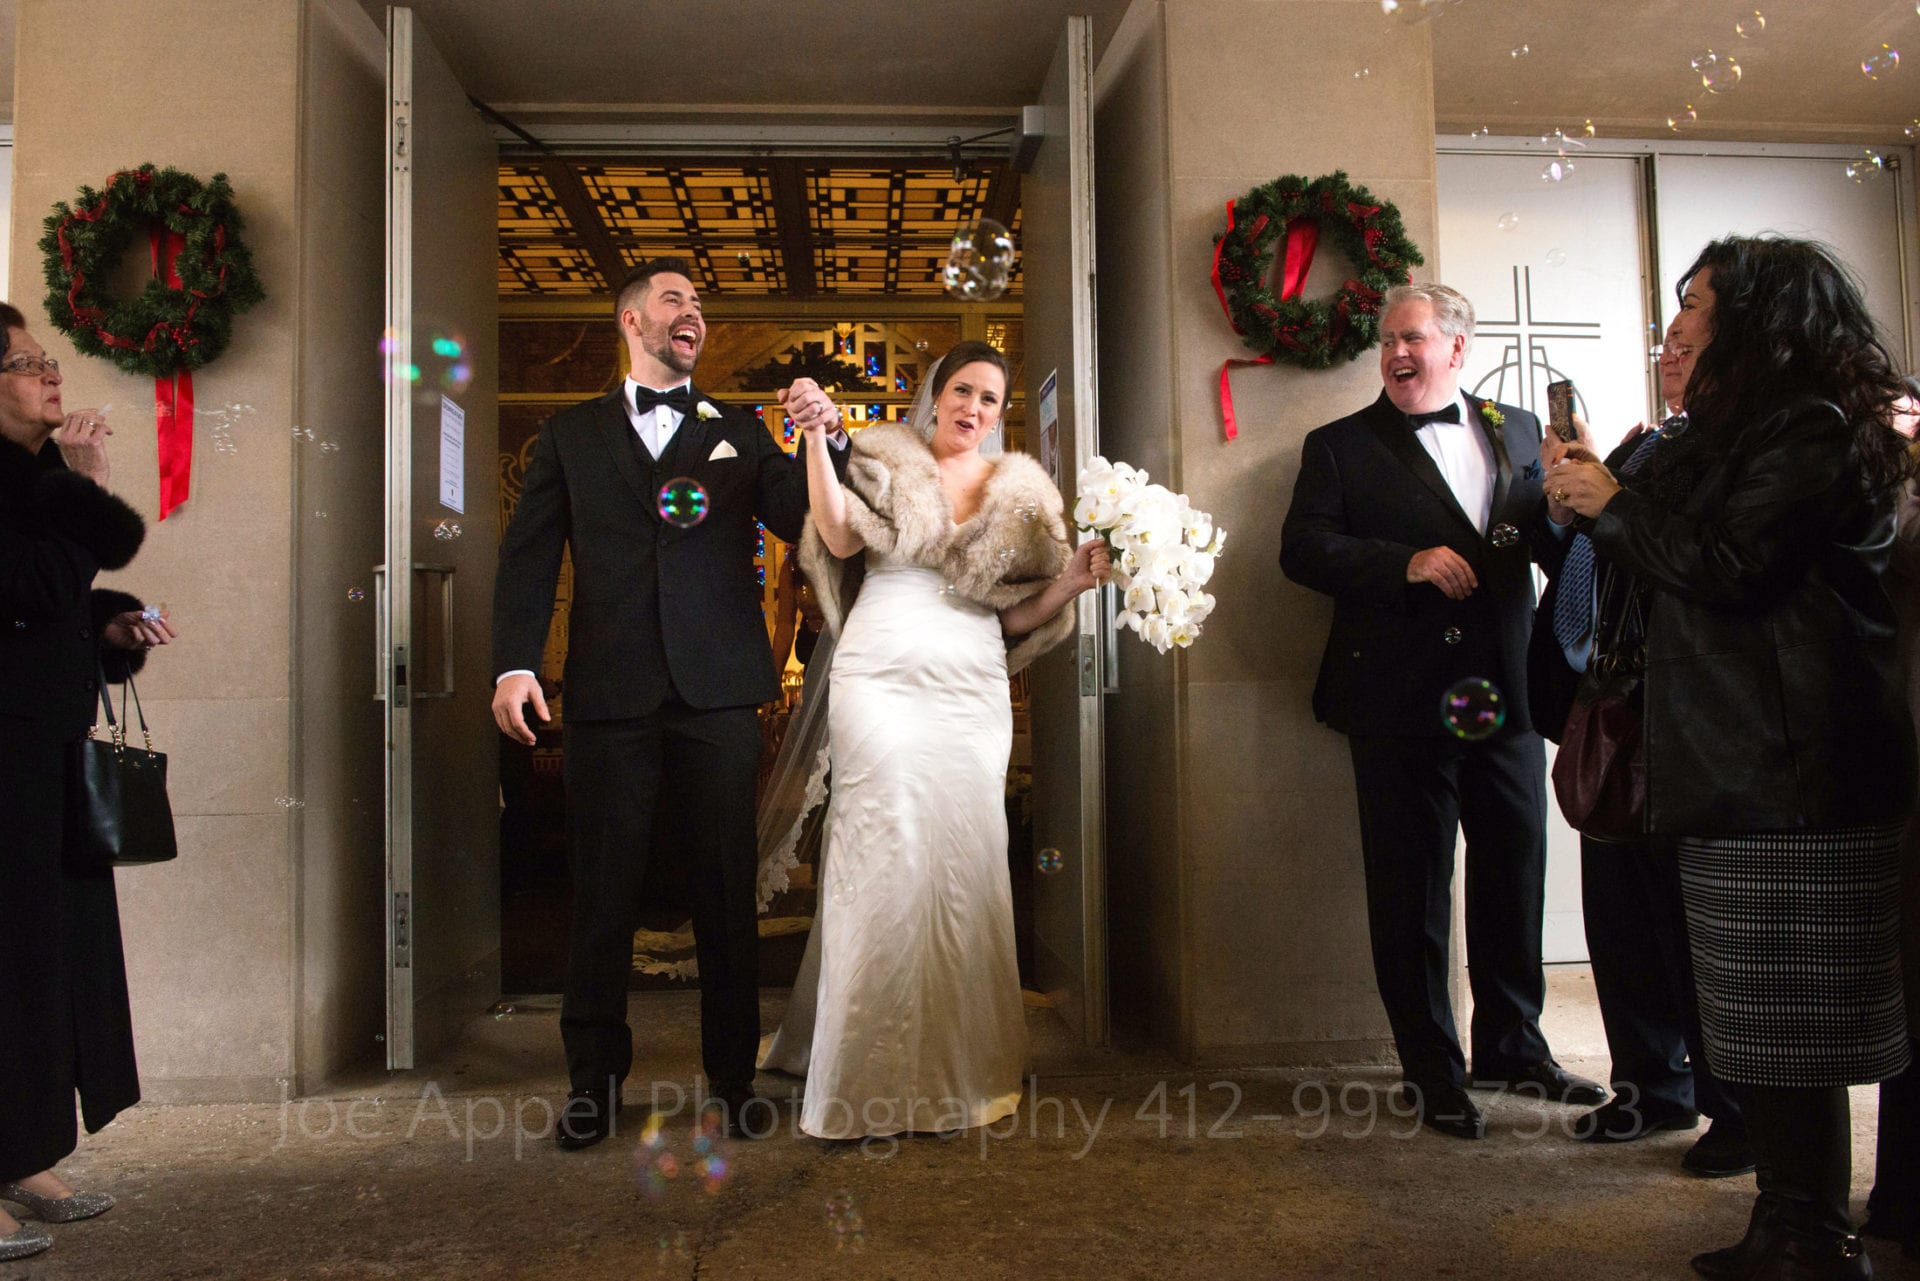 A bride and groom arrive at the door of the church after their wedding and are greeted by their cheering guests who are blowing bubbles.